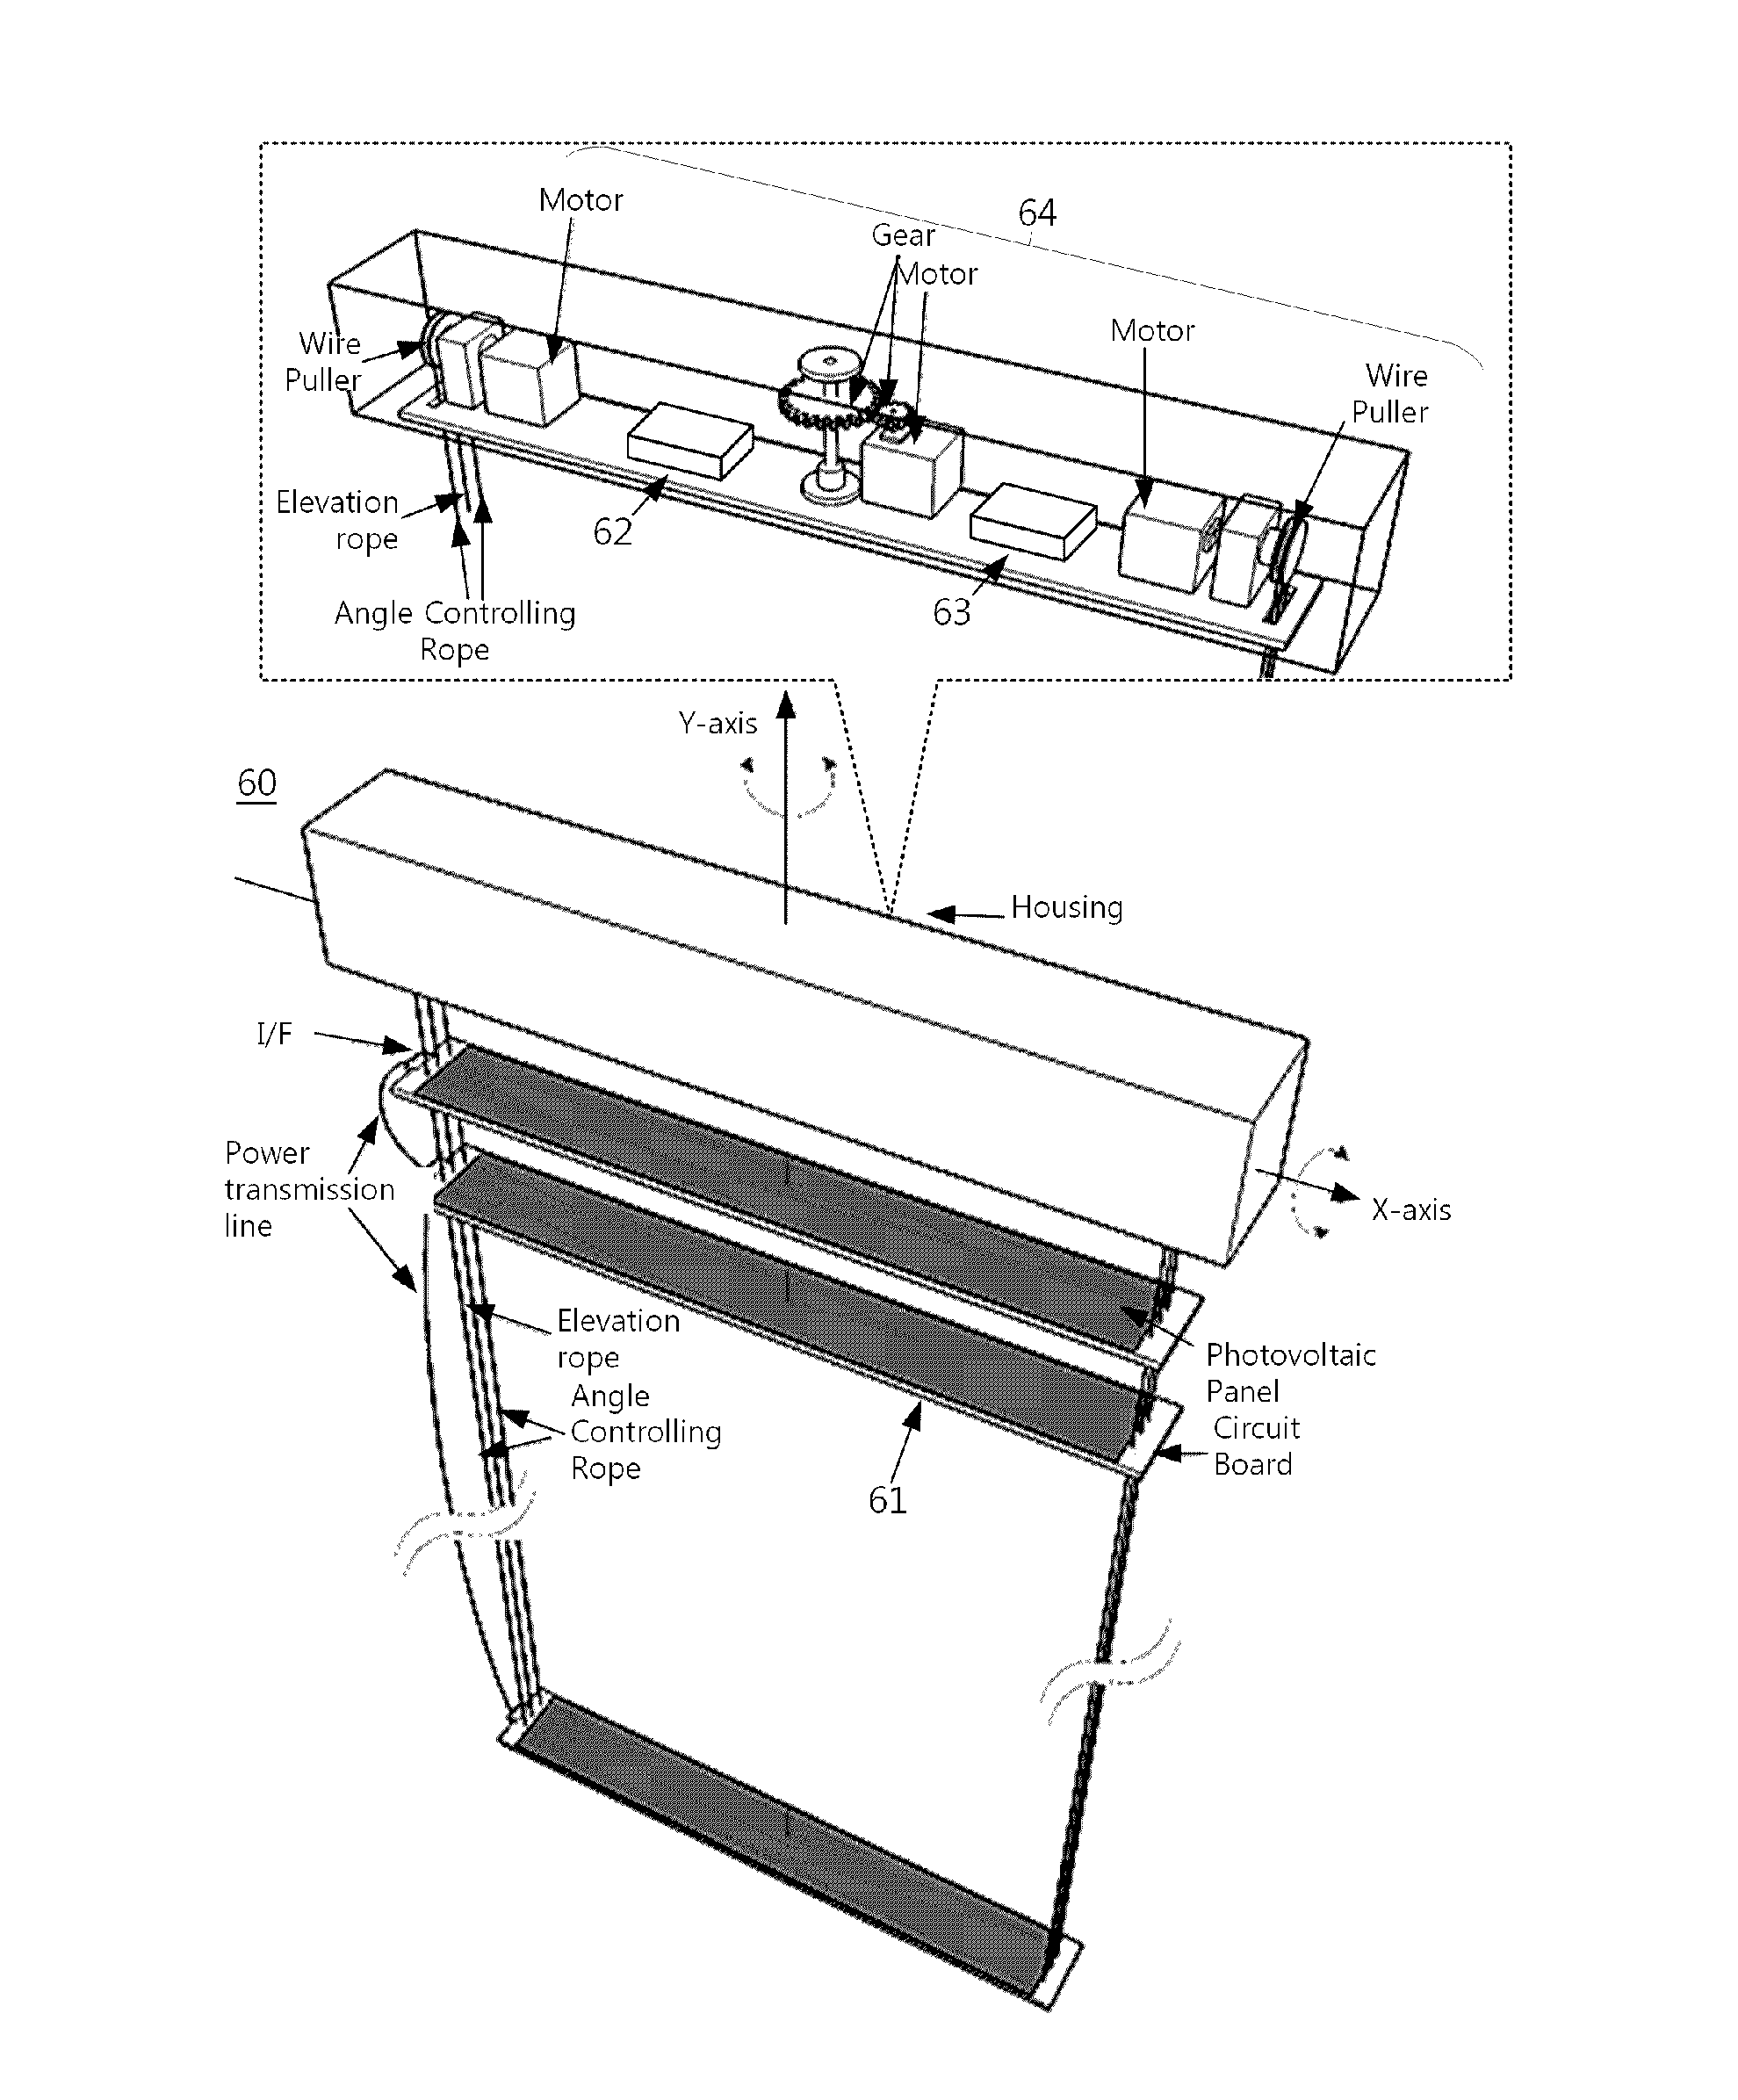 Method for hybrid solar tracking, and apparatus for hybrid solar tracking and photovoltaic blind system using same